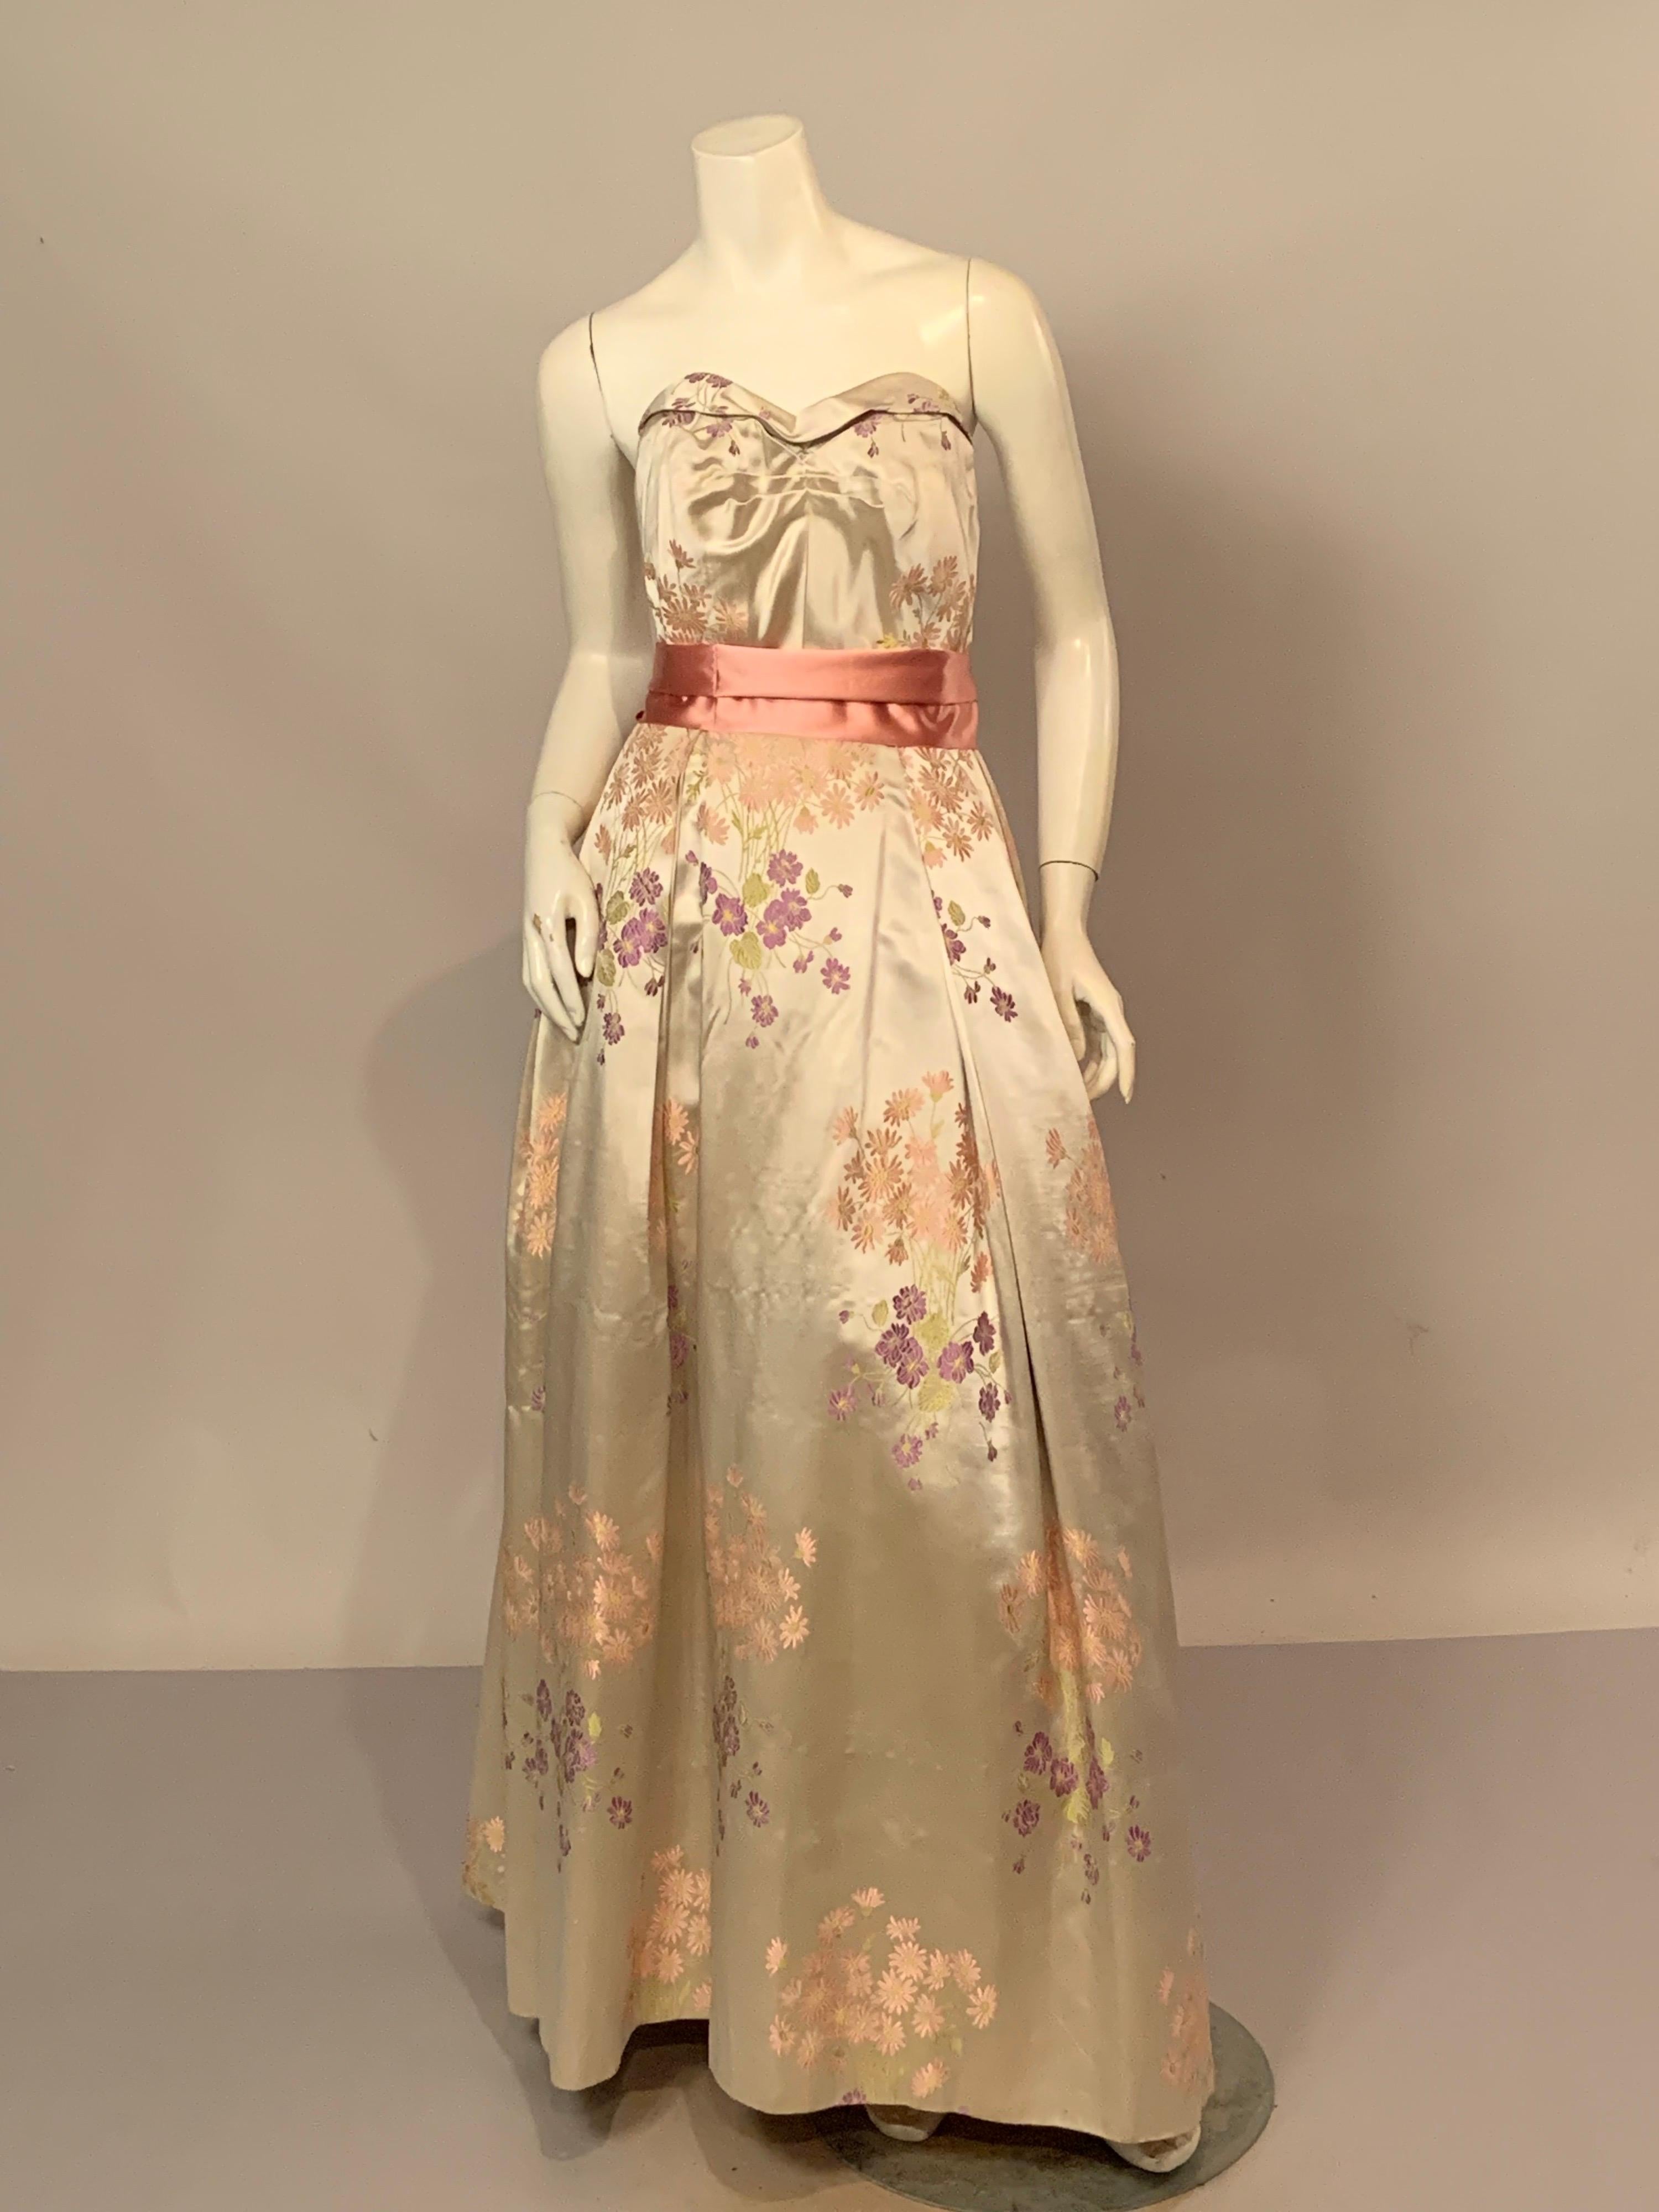 Ivory silk satin is woven with pink and green daisies and green leaves and stems, accented by a pink ribbon sash. The dress has a boned bodice with horizontal tucks at the center front and it is cut low in the back. The full skirt has pleats at the